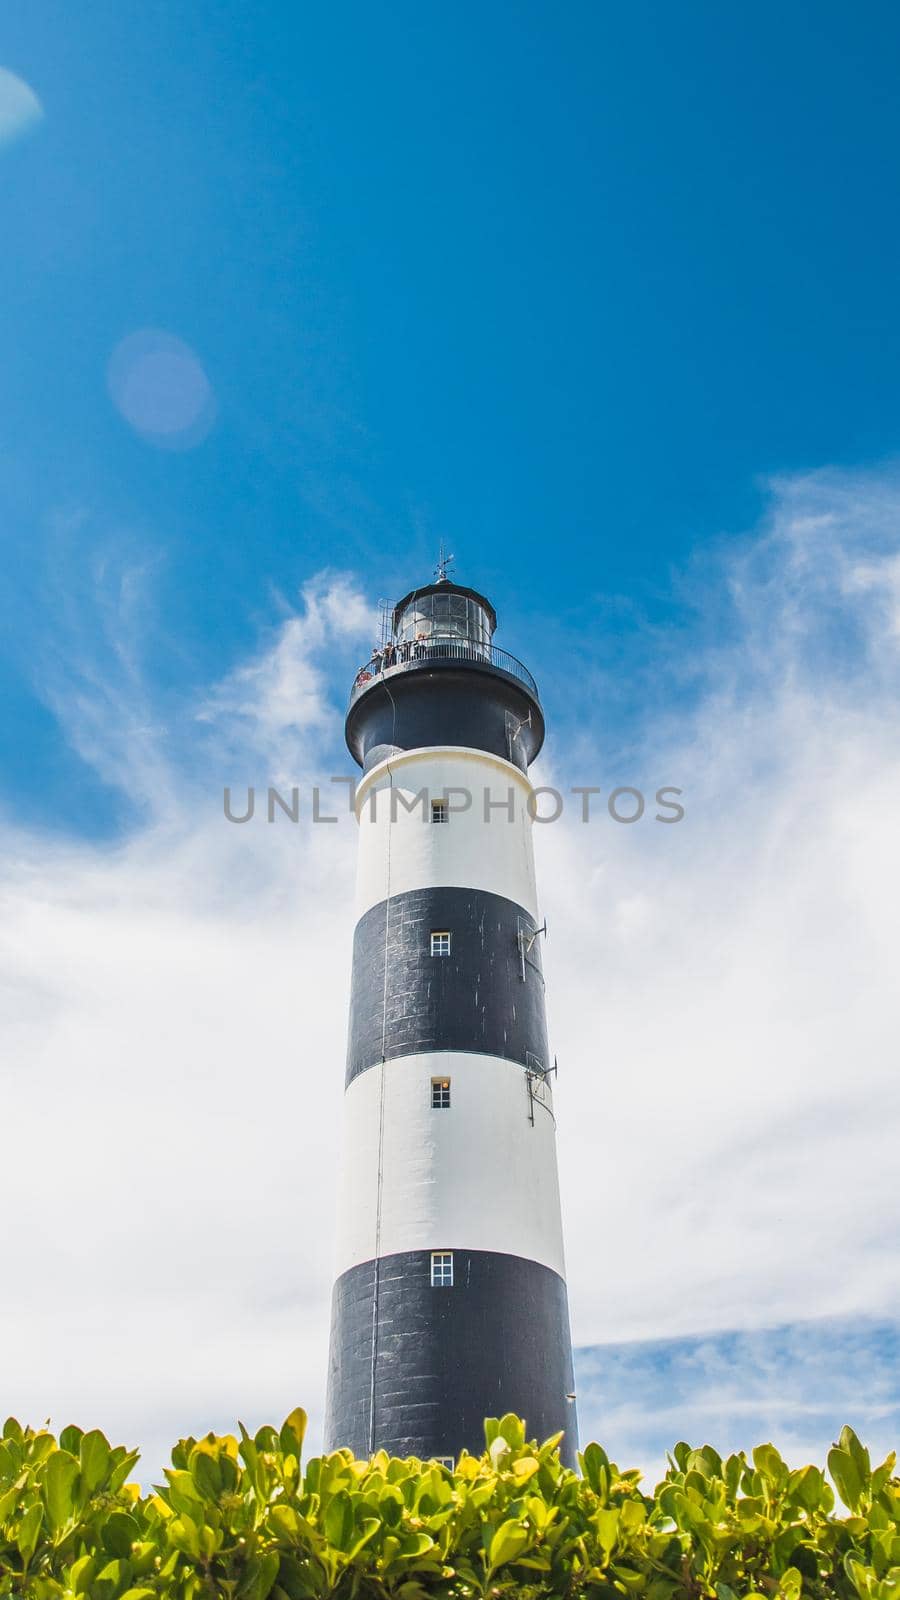 The Chassiron lighthouse with black and white stripes on blue sky, on the island of Oléron in France